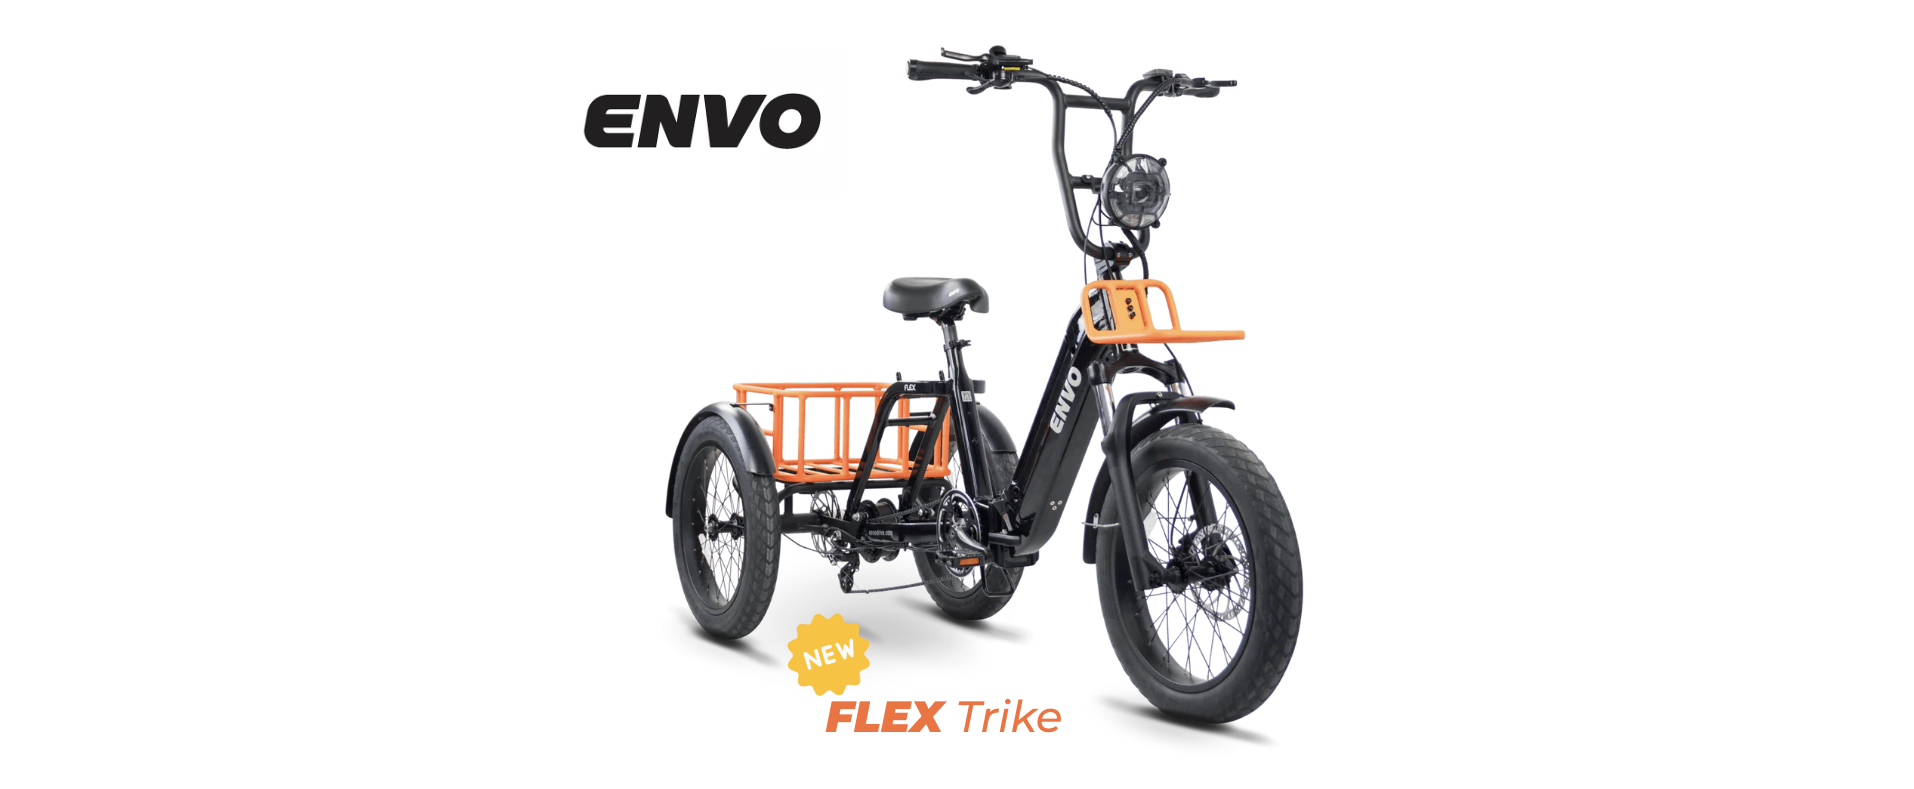 ENVO Flex Trike Gets a Game-Changing Update: Differential Transmission